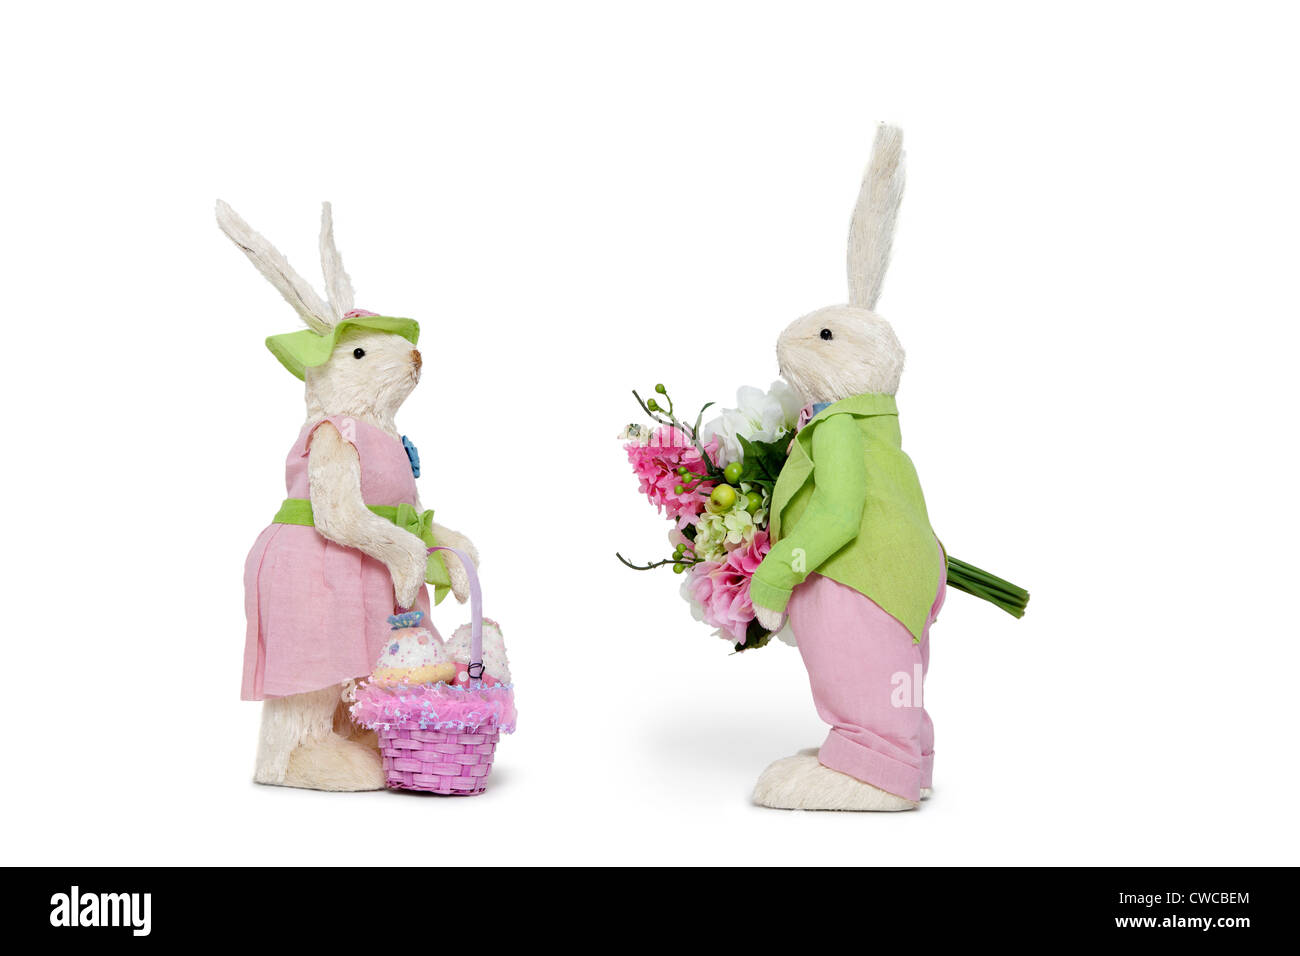 Side view of male Bunny with flower bouquet and female Rabbit over white background Stock Photo